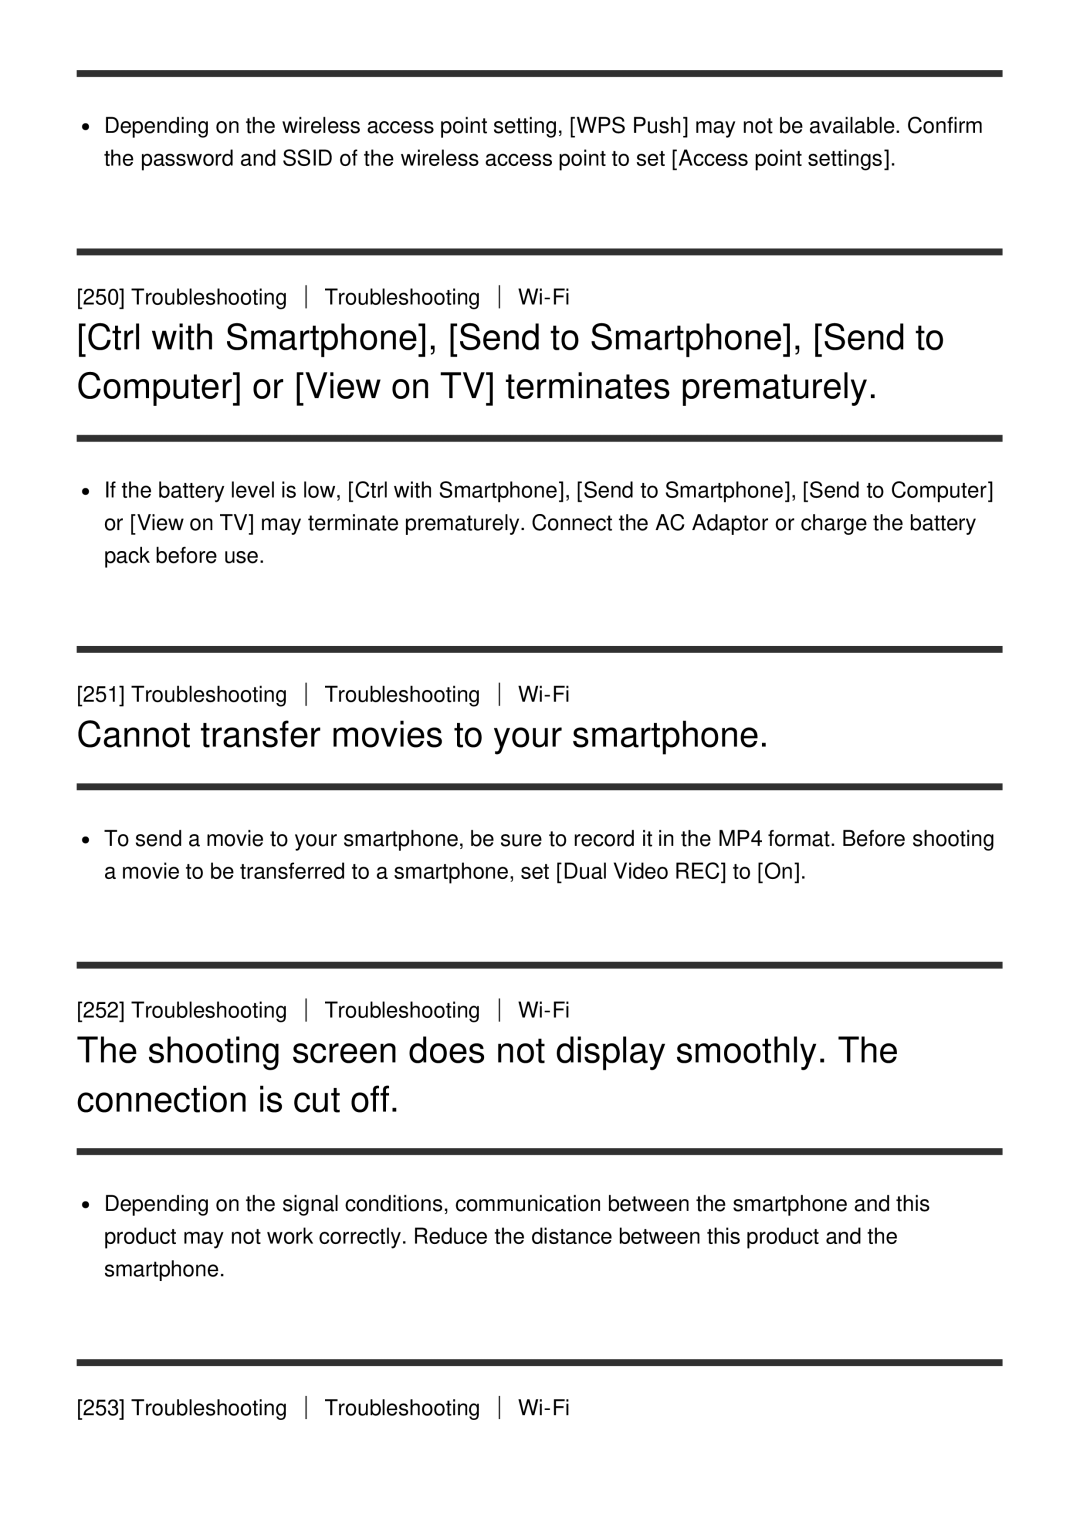 Sony HDR-CX900E, FDR-AX100E manual Cannot transfer movies to your smartphone 